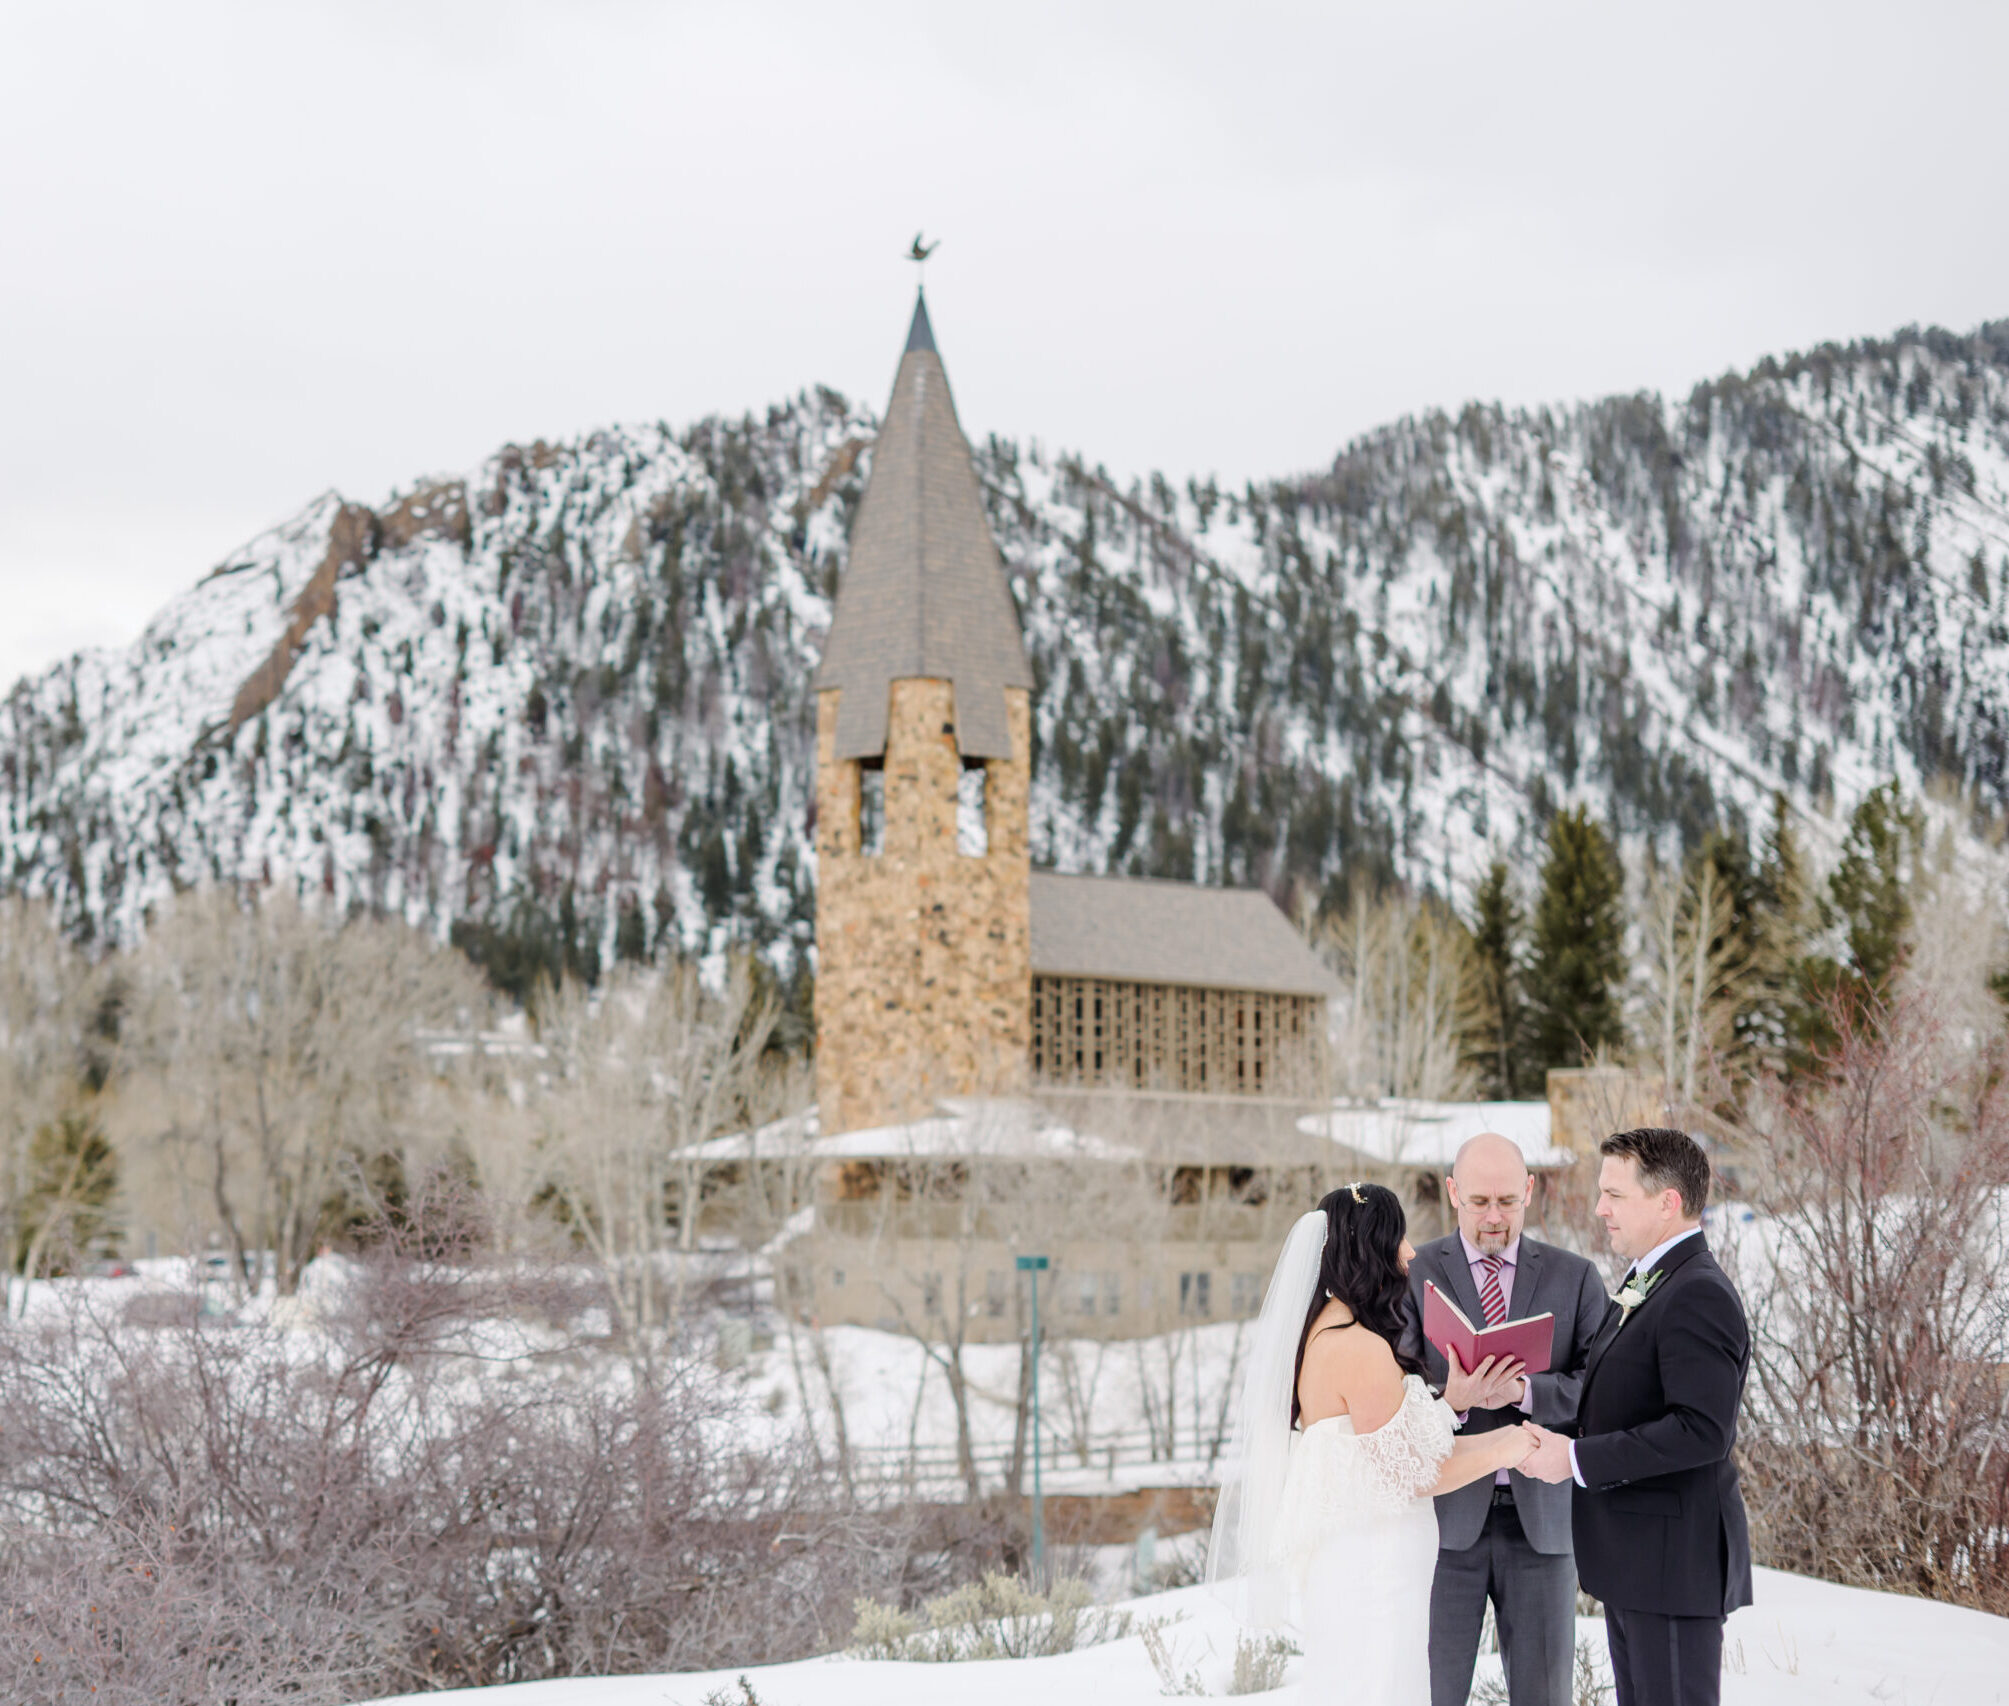 Winter wedding ceremony in front of Aspen Chapel with snow-covered mountains in background.